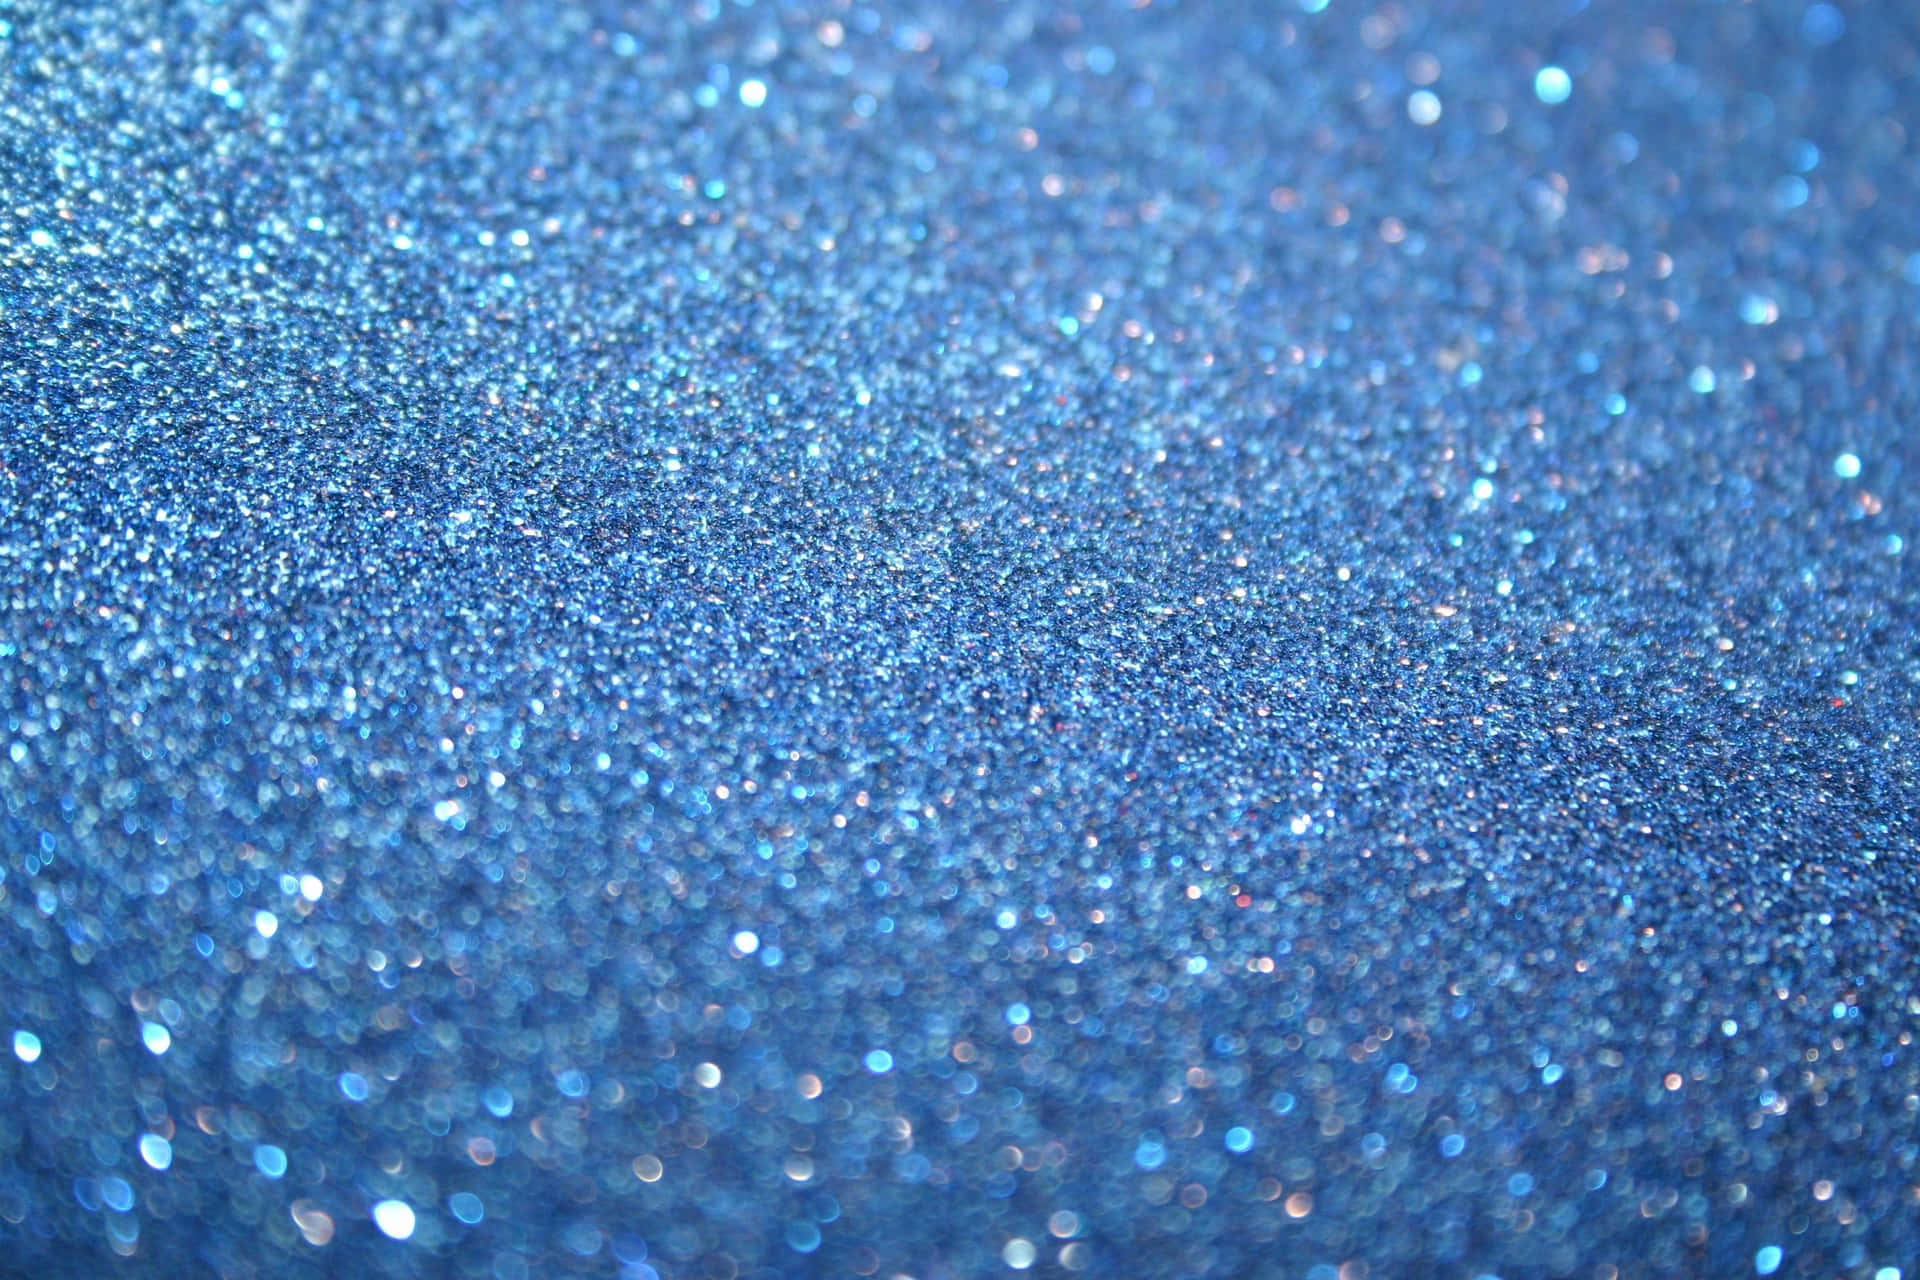 Shine brighter with a beautiful Blue Glitter background!